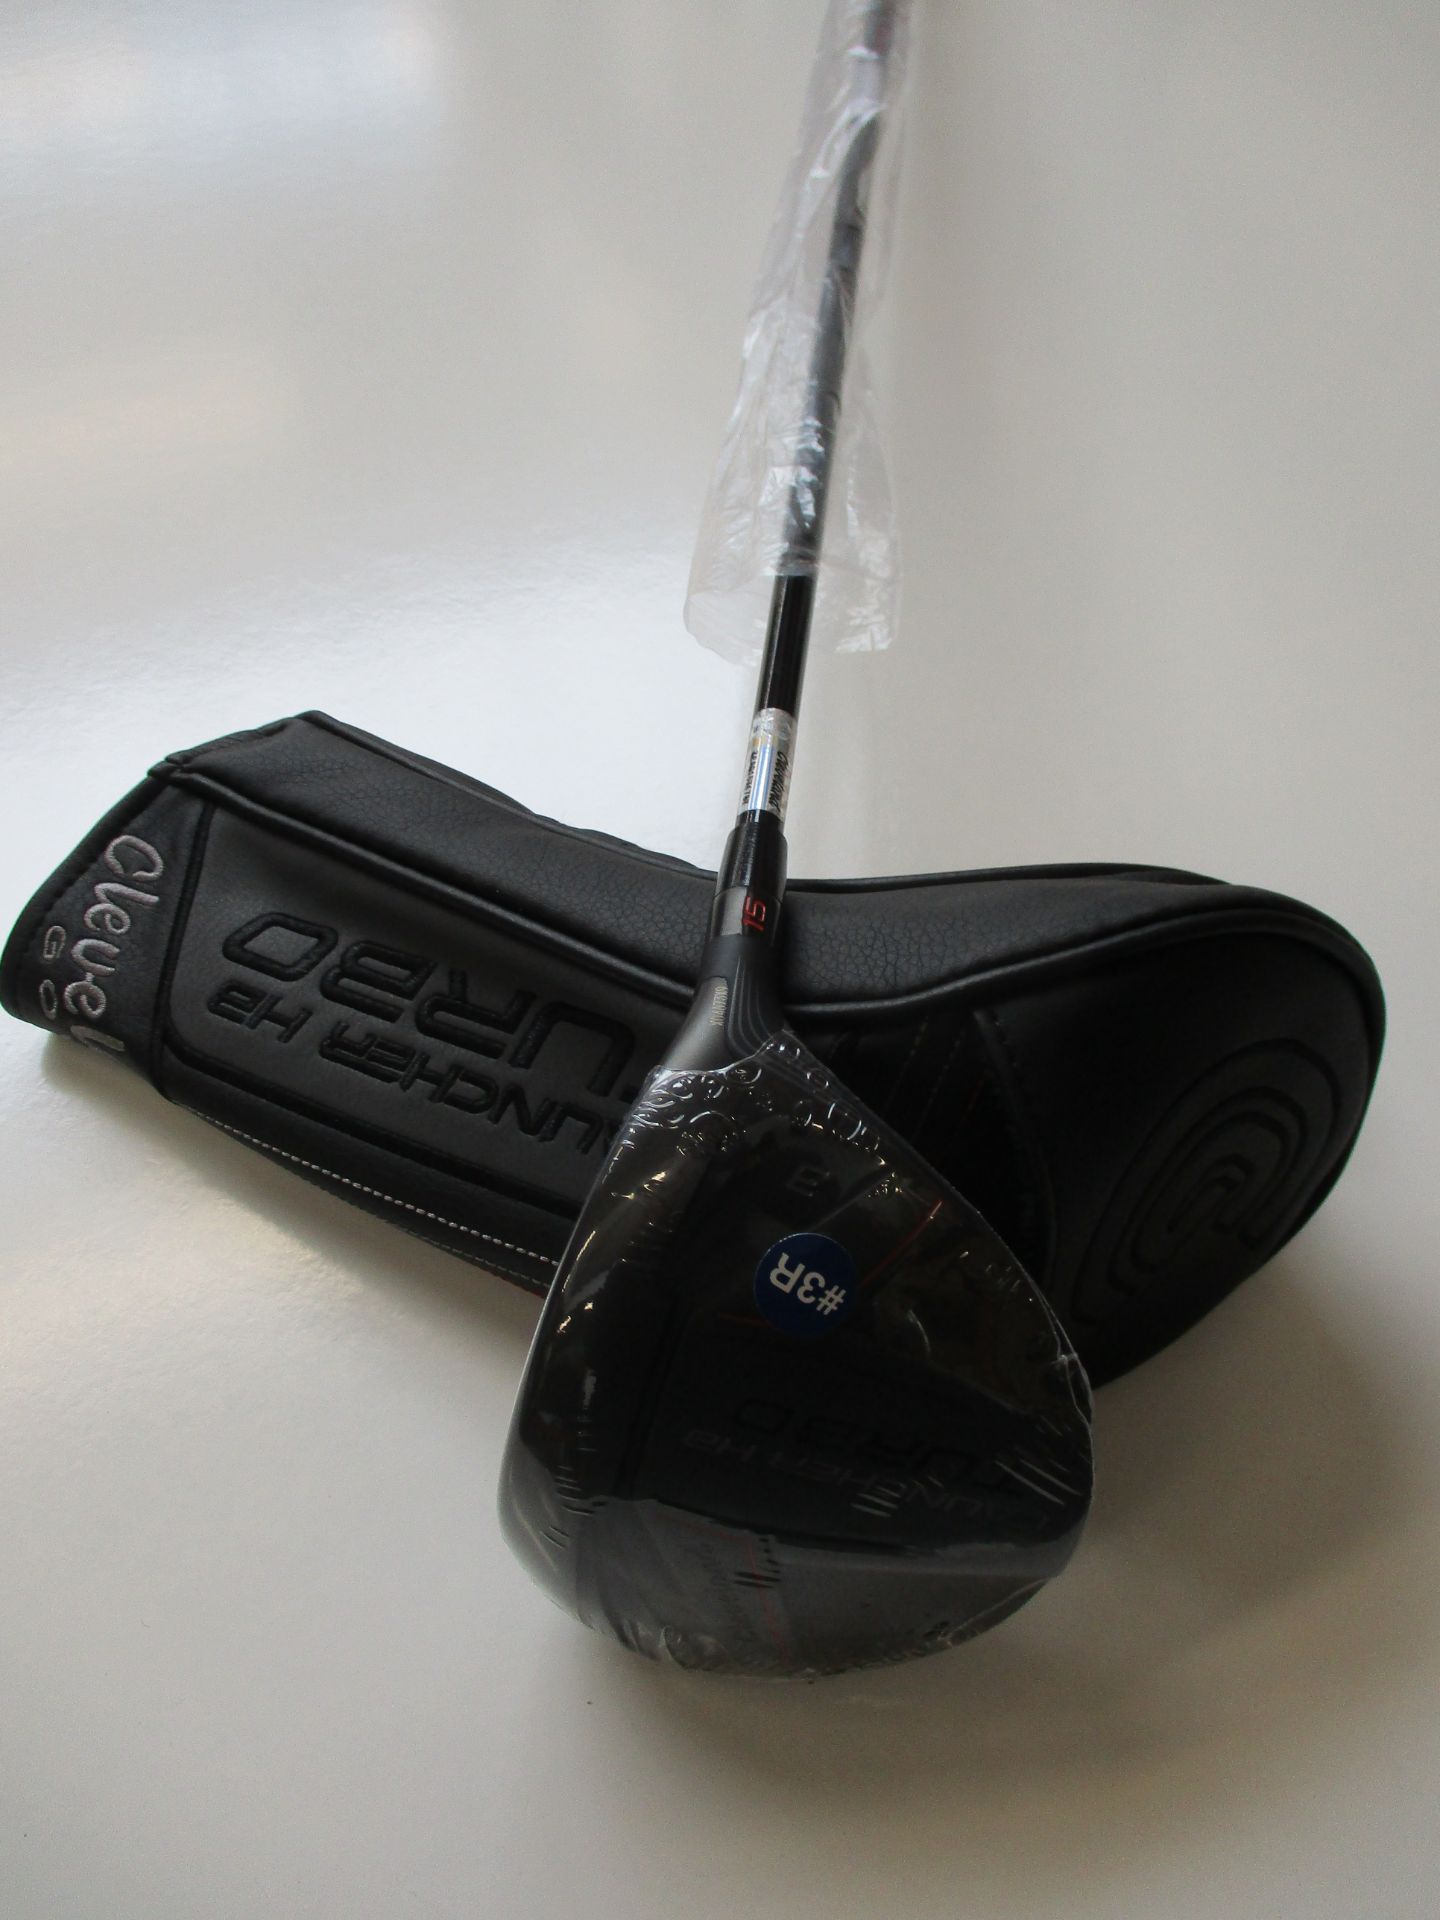 An as new Cleaveland Golf Launcher HB Turbo golf club.